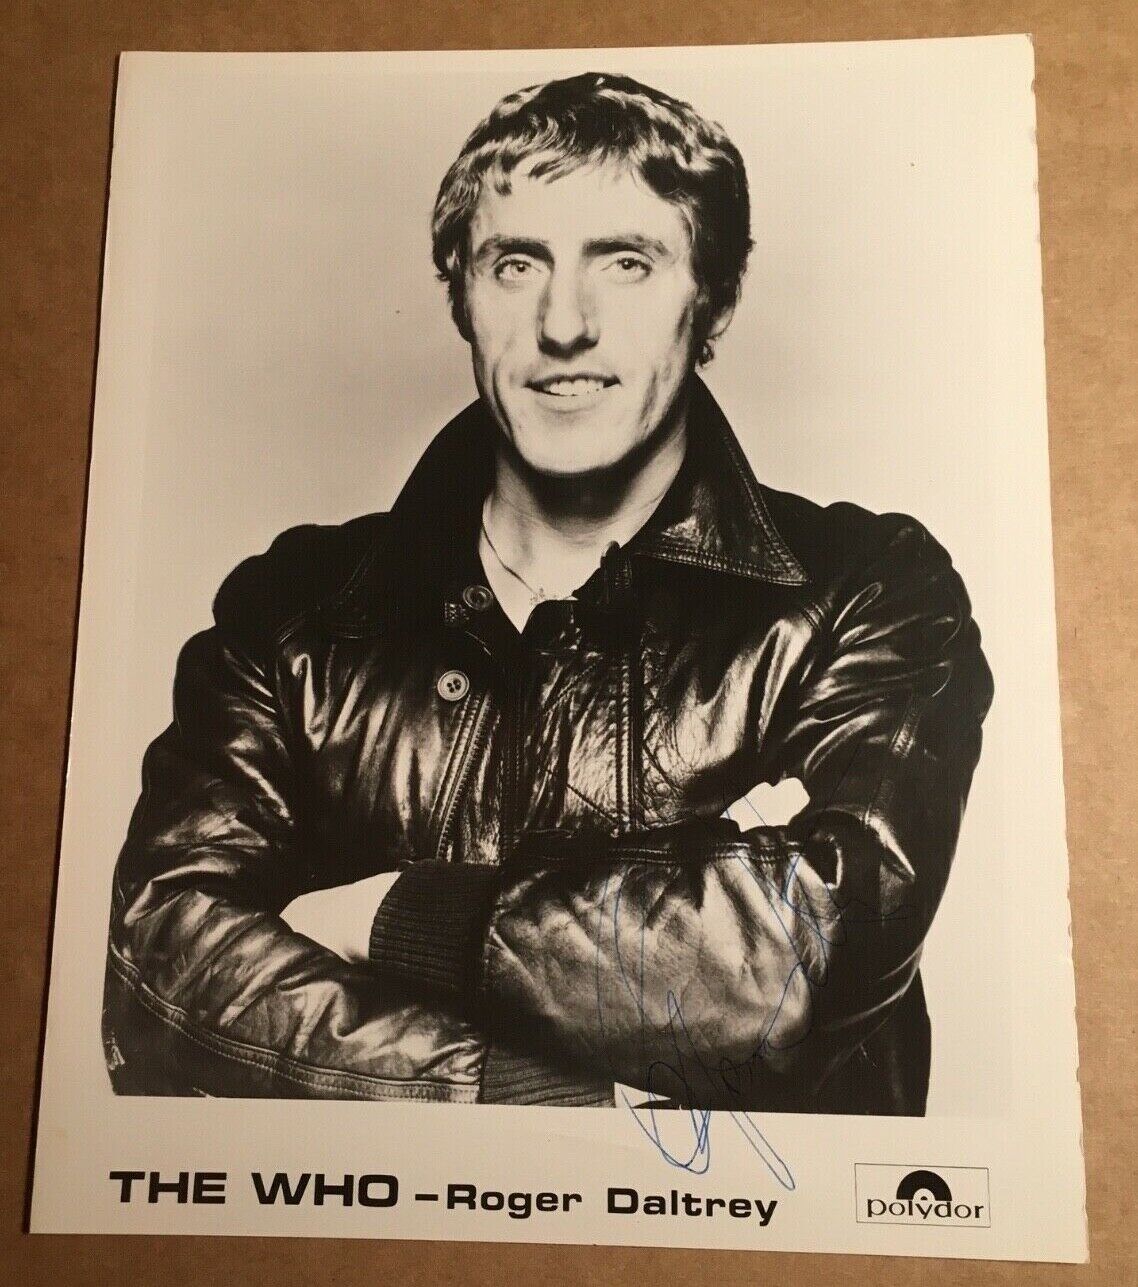 ROGER DALTREY The Who Genuine Authentic Signed 10x8 PROMO Photo Poster painting UACC COA